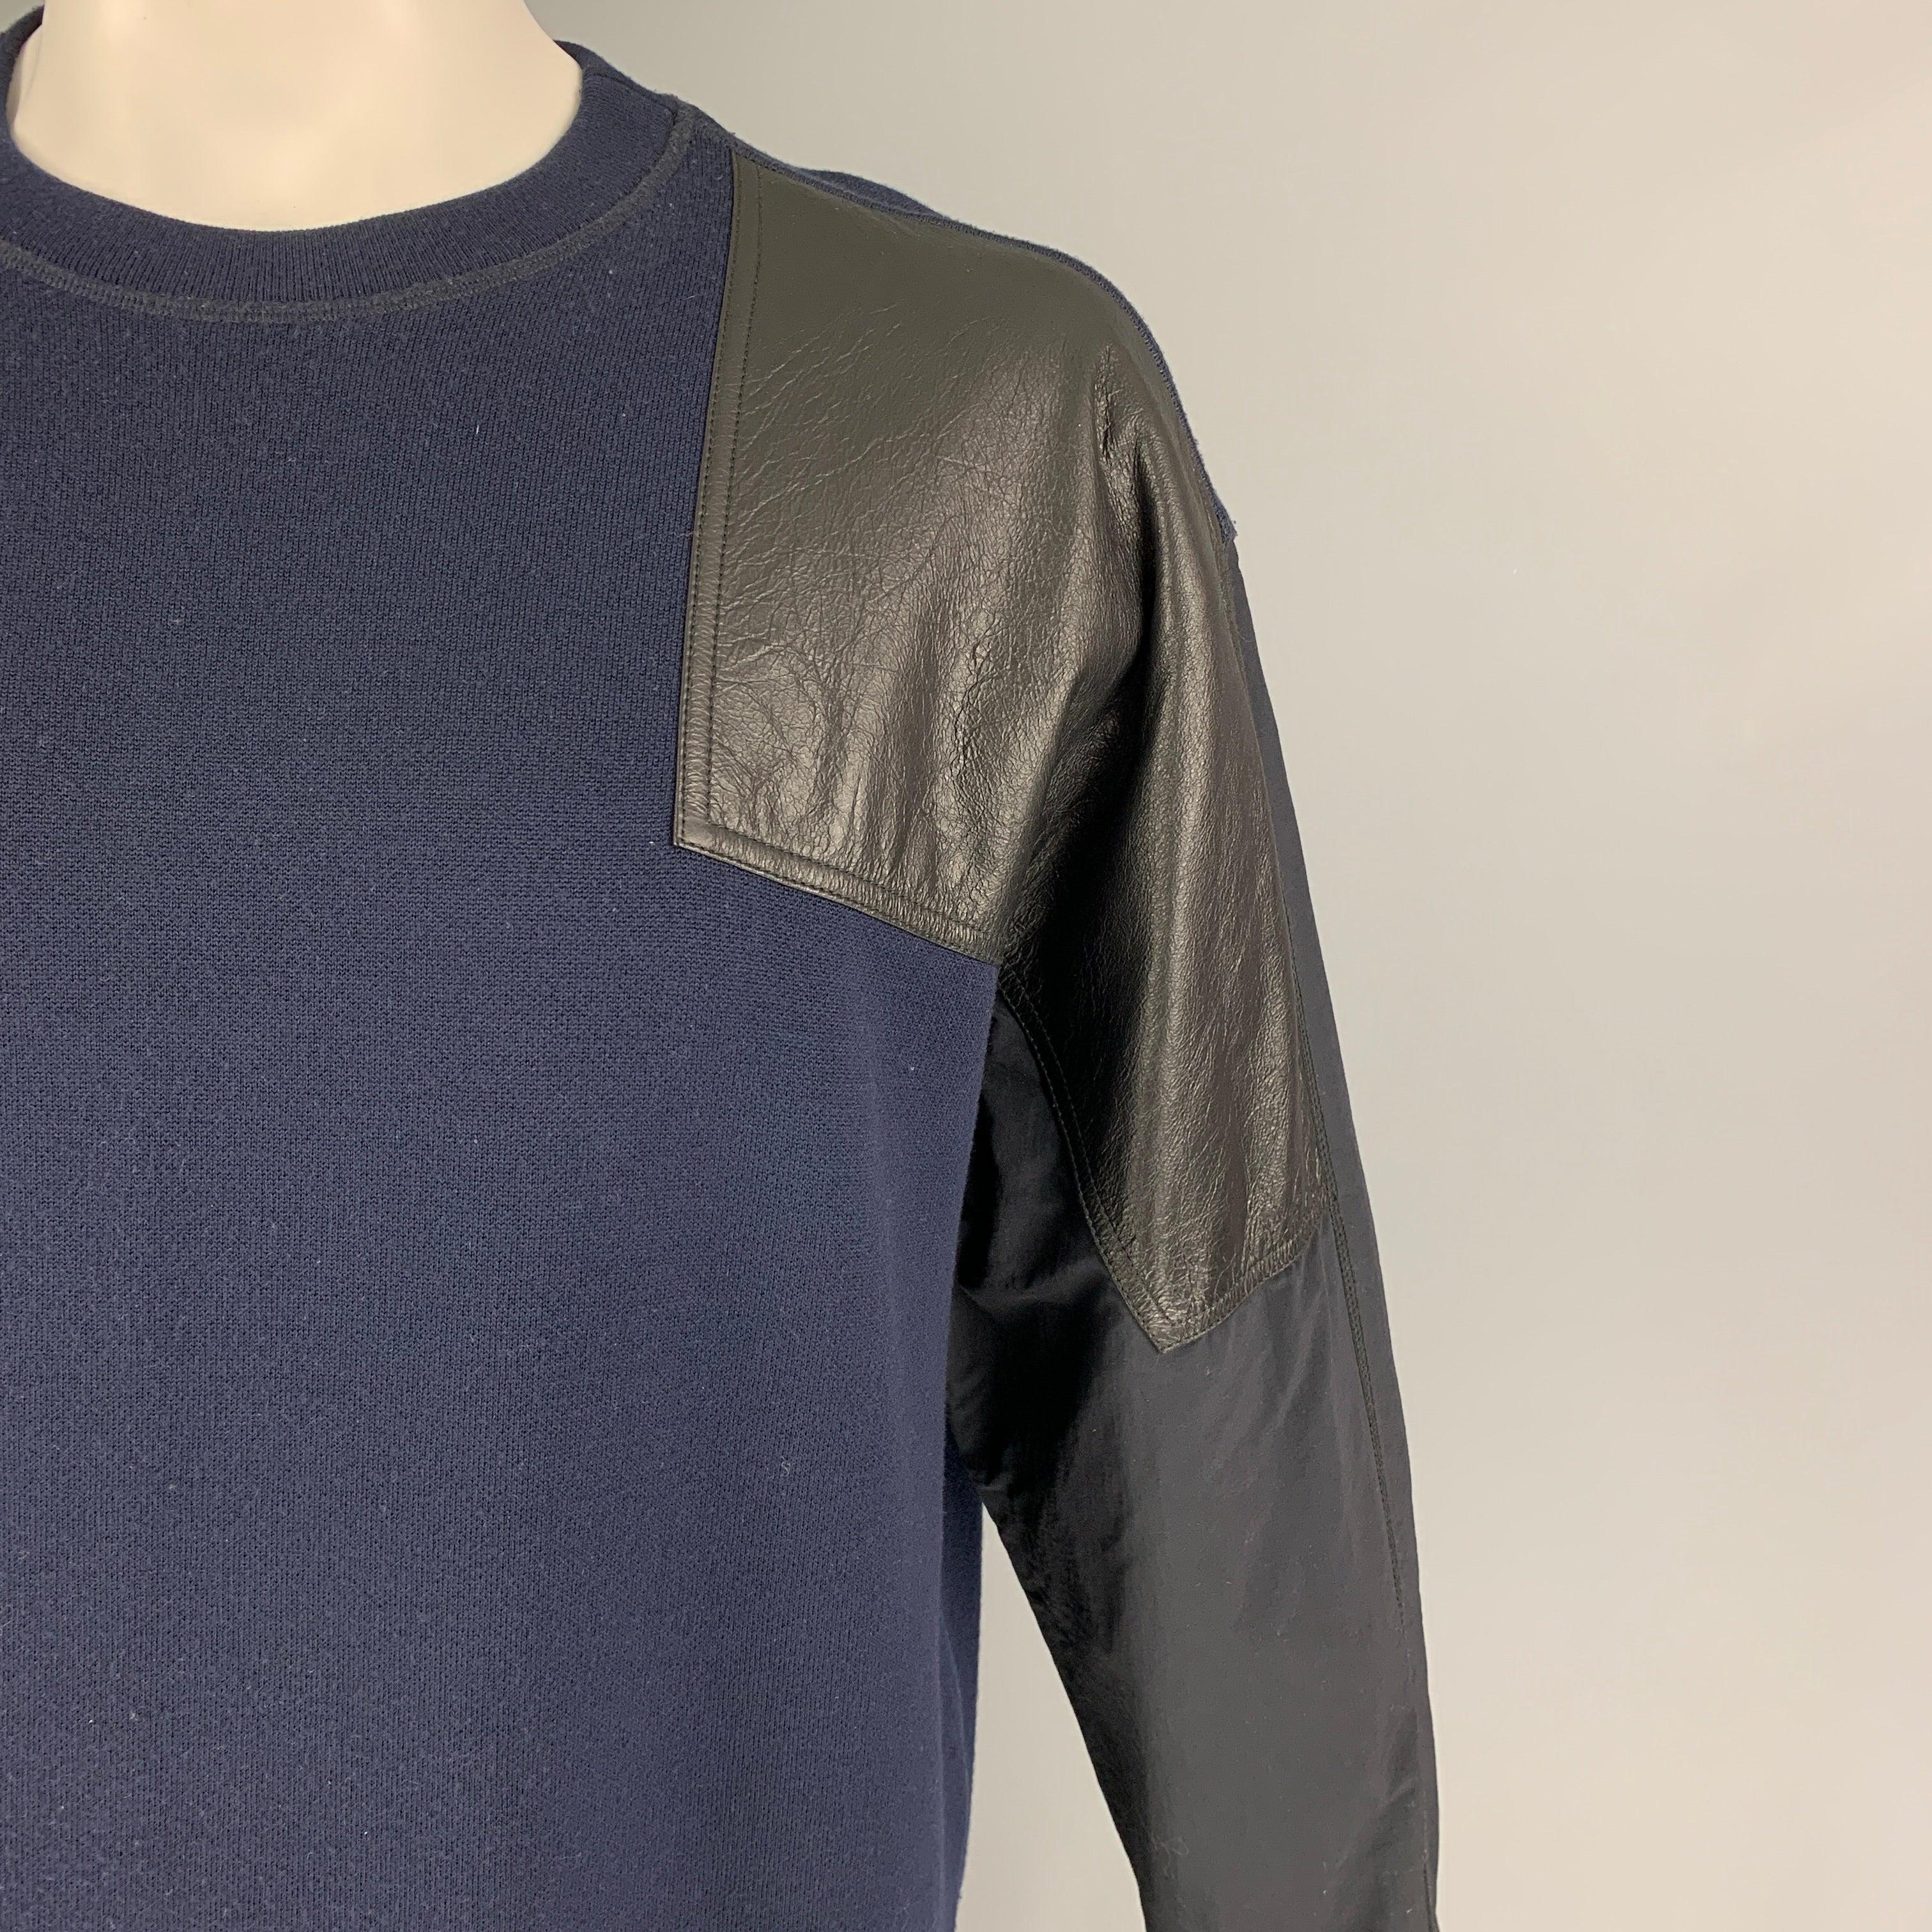 ALEXANDER WANG pullover comes in a navy & black mixed materials featuring
 a faux leather patch, and a crew-neck.
Excellent
Pre-Owned Condition. 

Marked:   48 

Measurements: 
 
Shoulder:
23.5 inches Chest: 50 inches Sleeve: 24 inches Length: 28